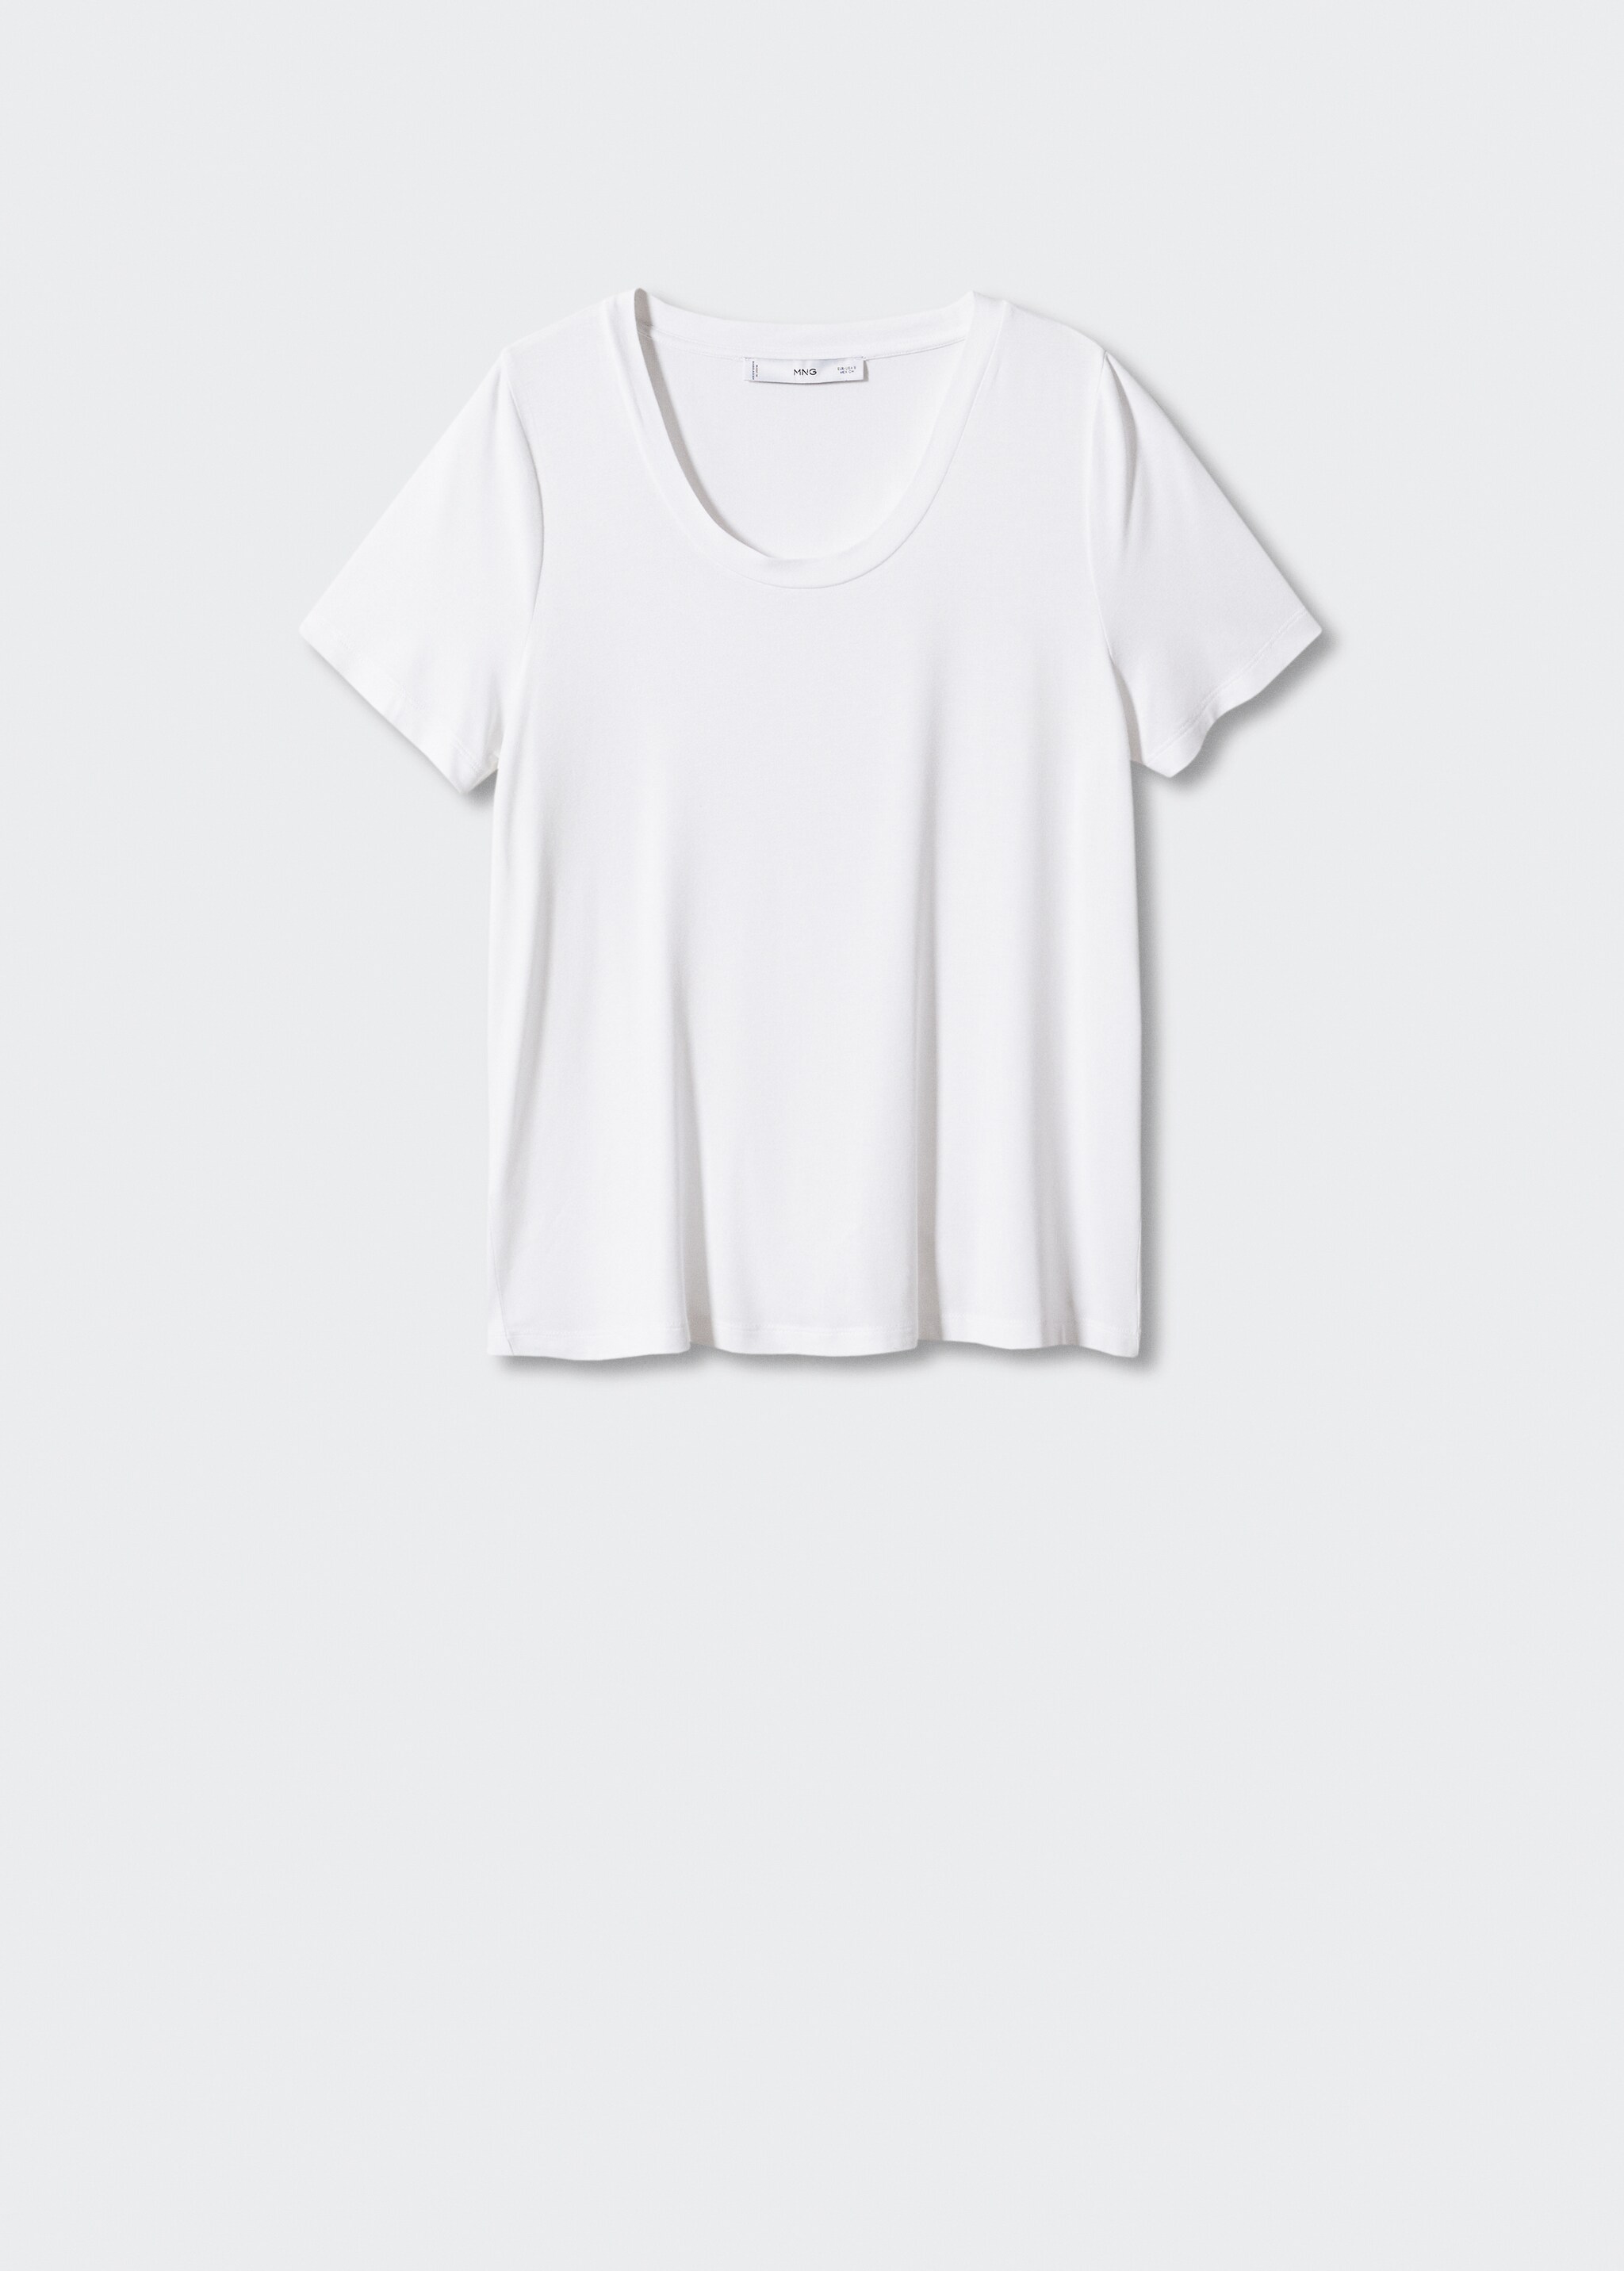 Low neck t-shirt - Article without model